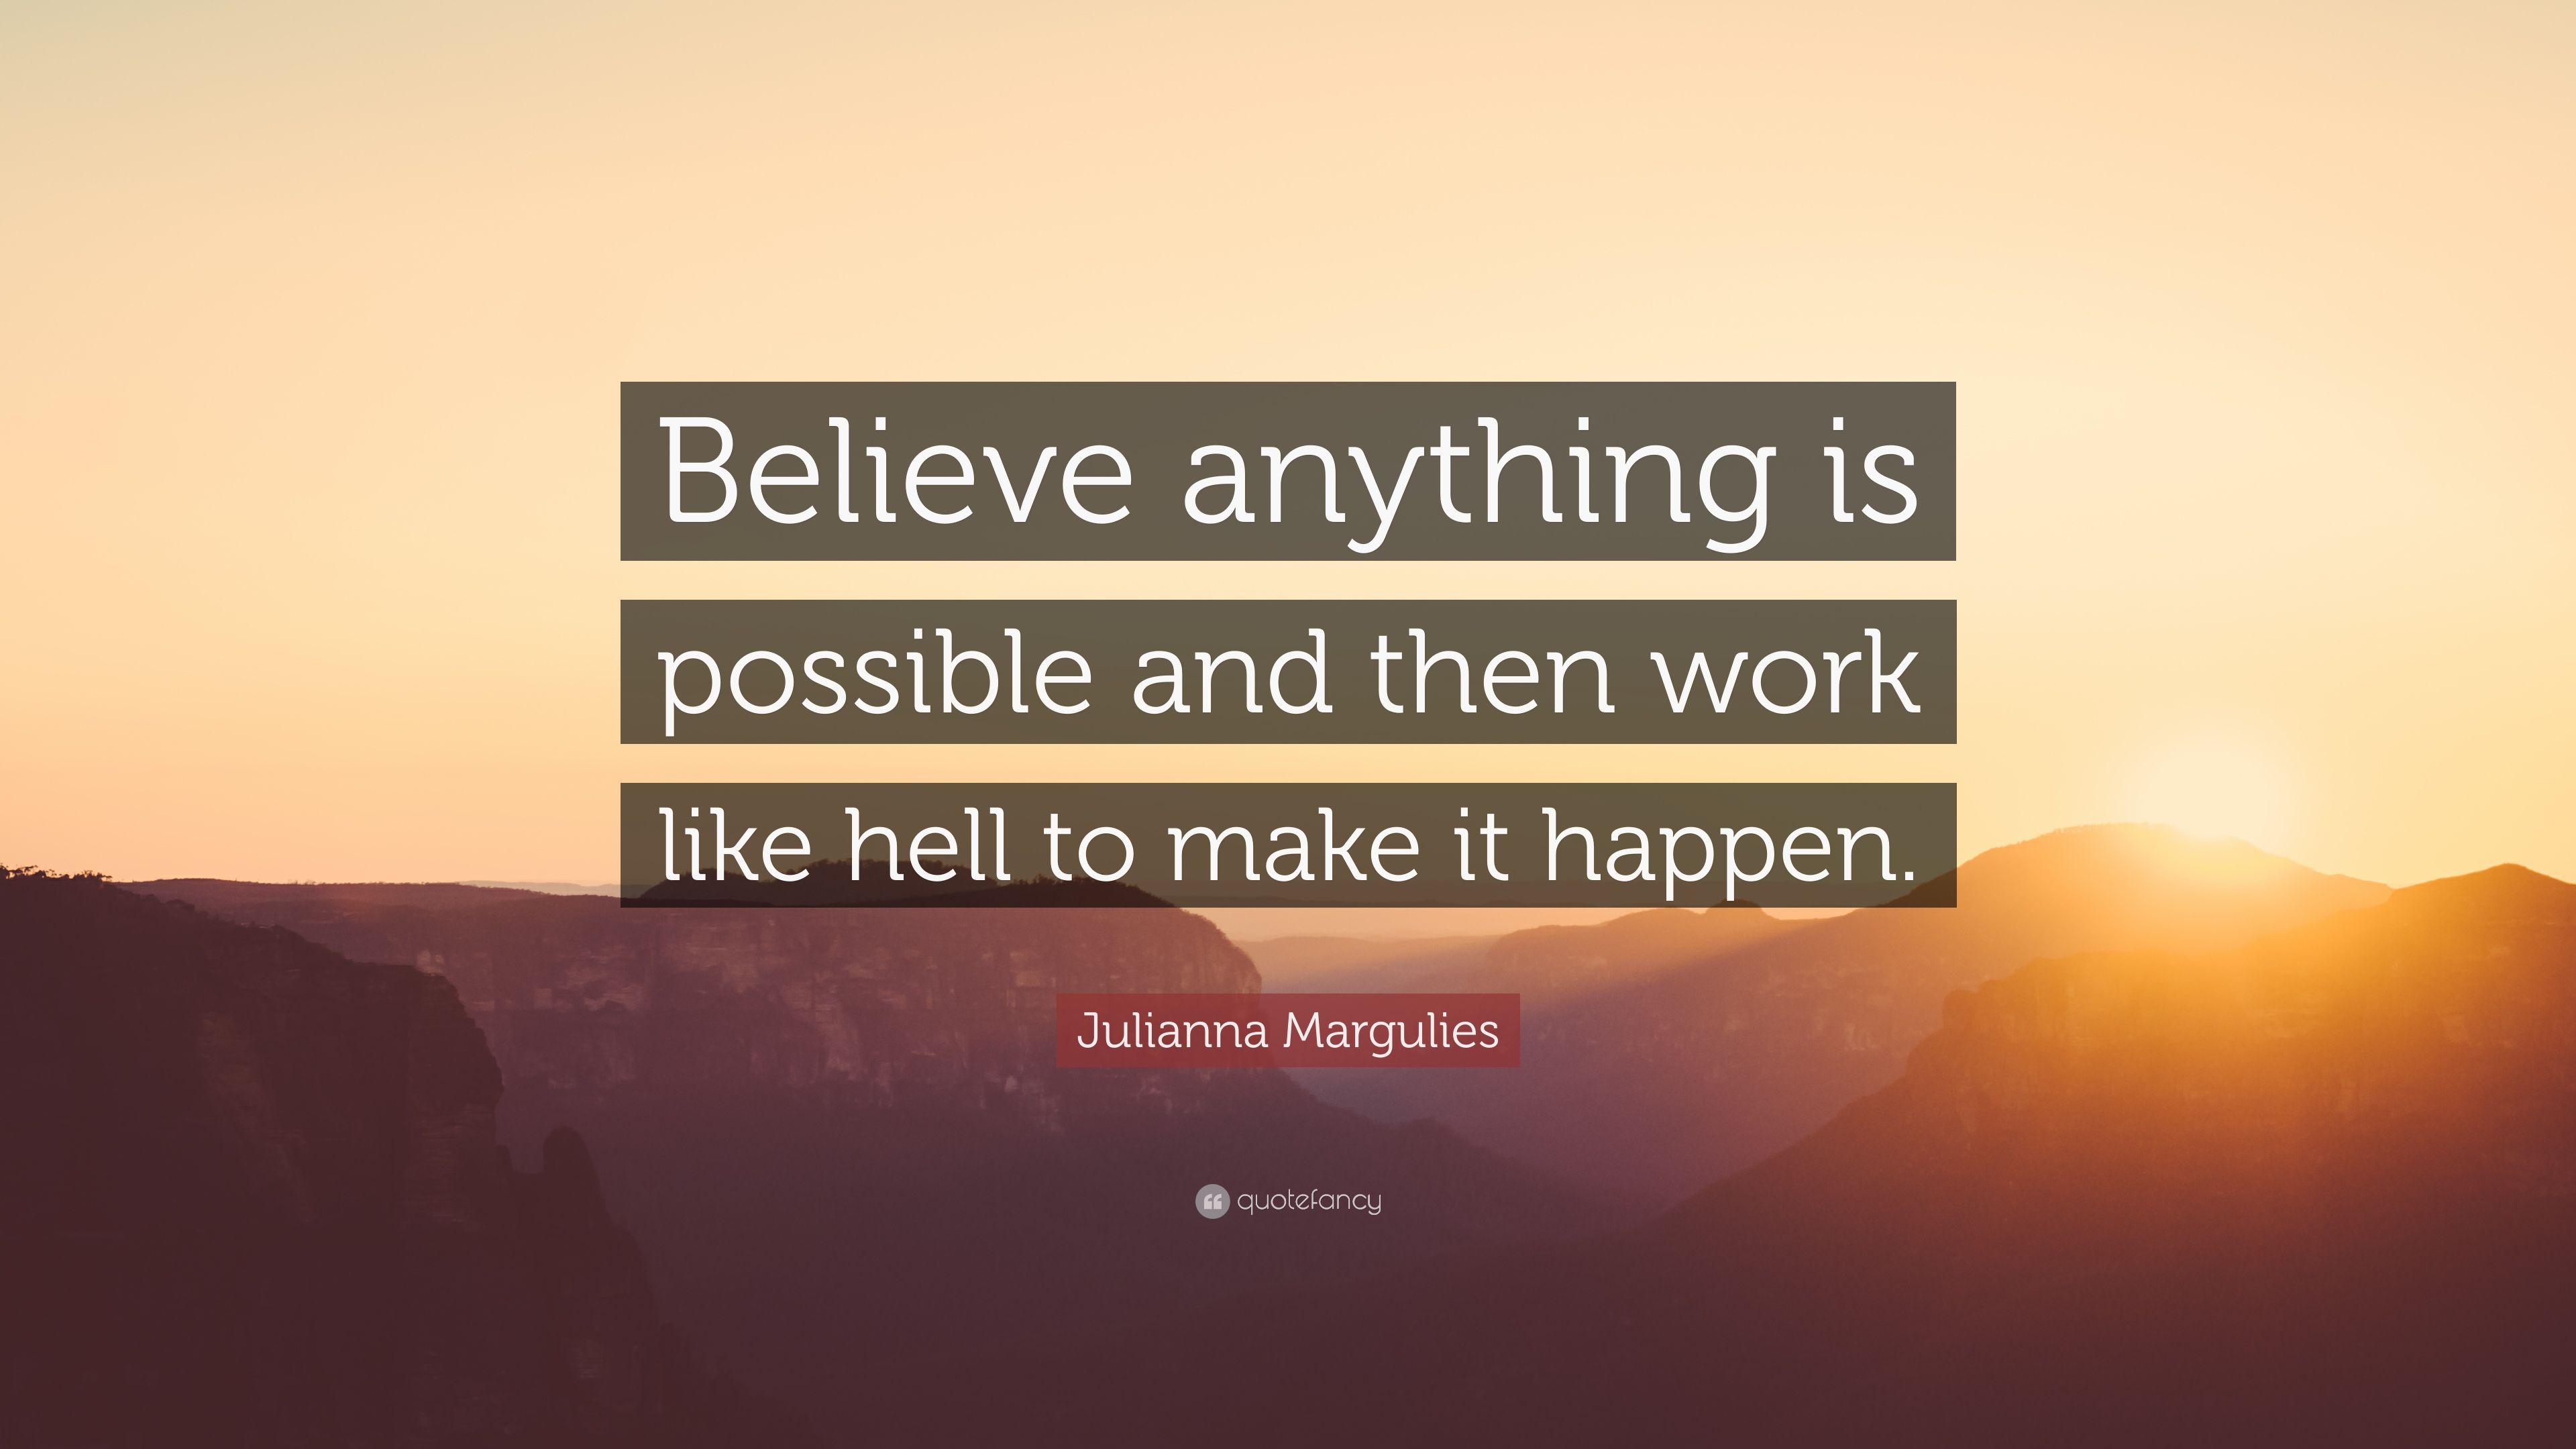 Julianna Margulies Quote: “Believe anything is possible and then work like hell to make it happen.” (9 wallpaper)